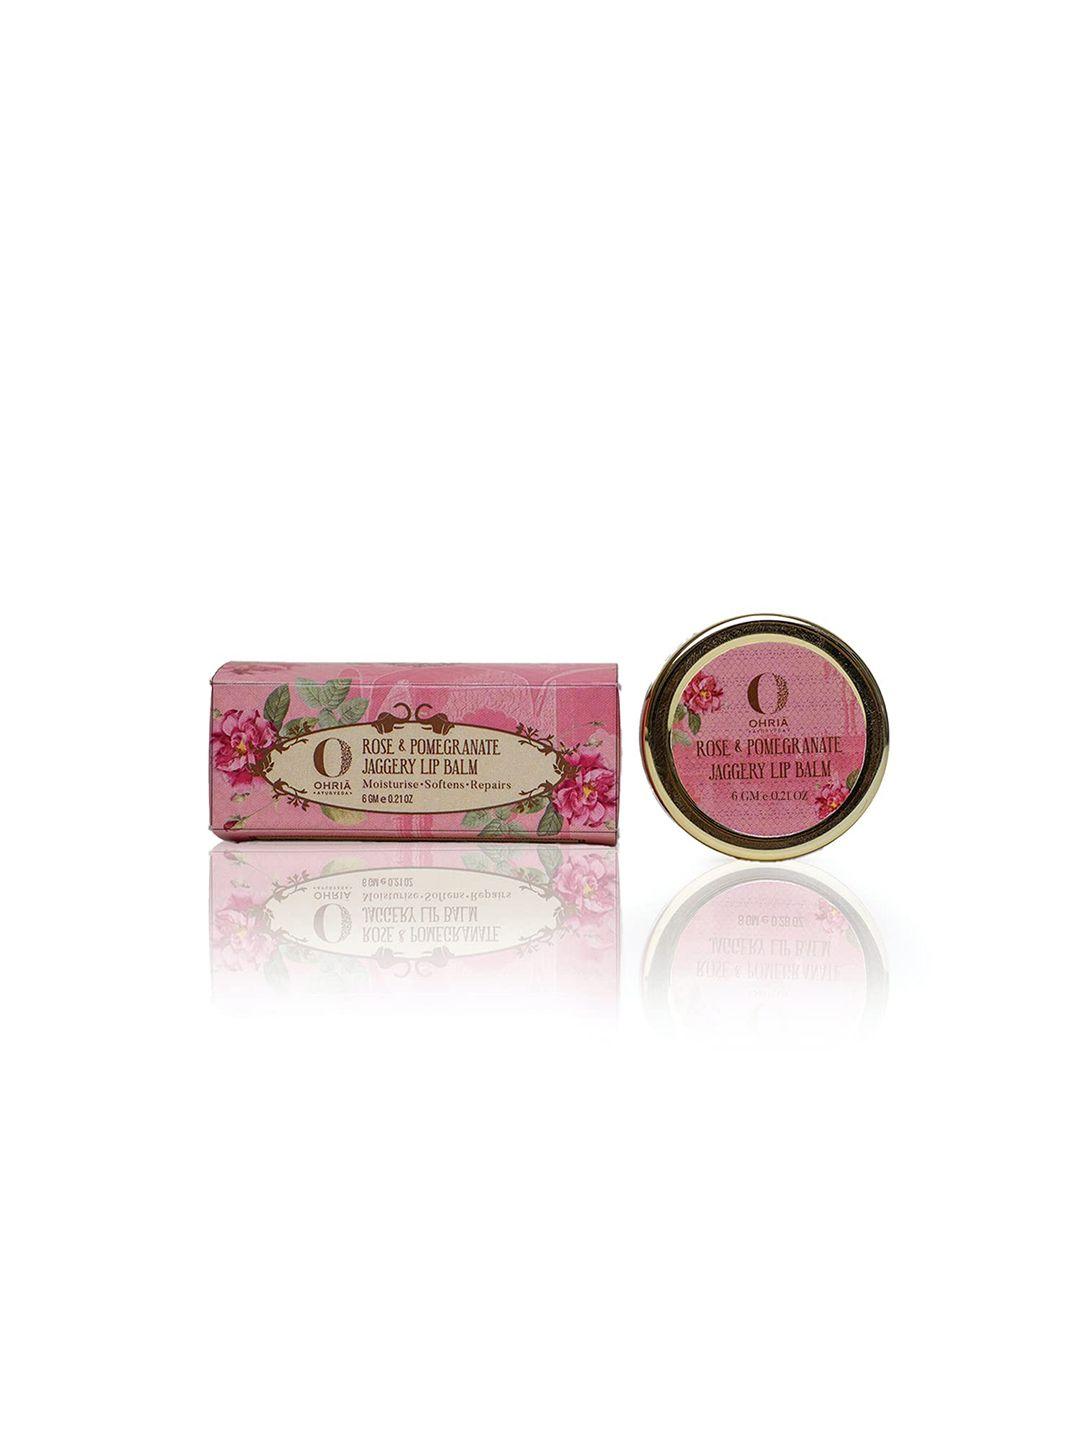 ohria ayurveda rose & pomegranate jaggery lip balm for moisturize softens & repairs - 8g